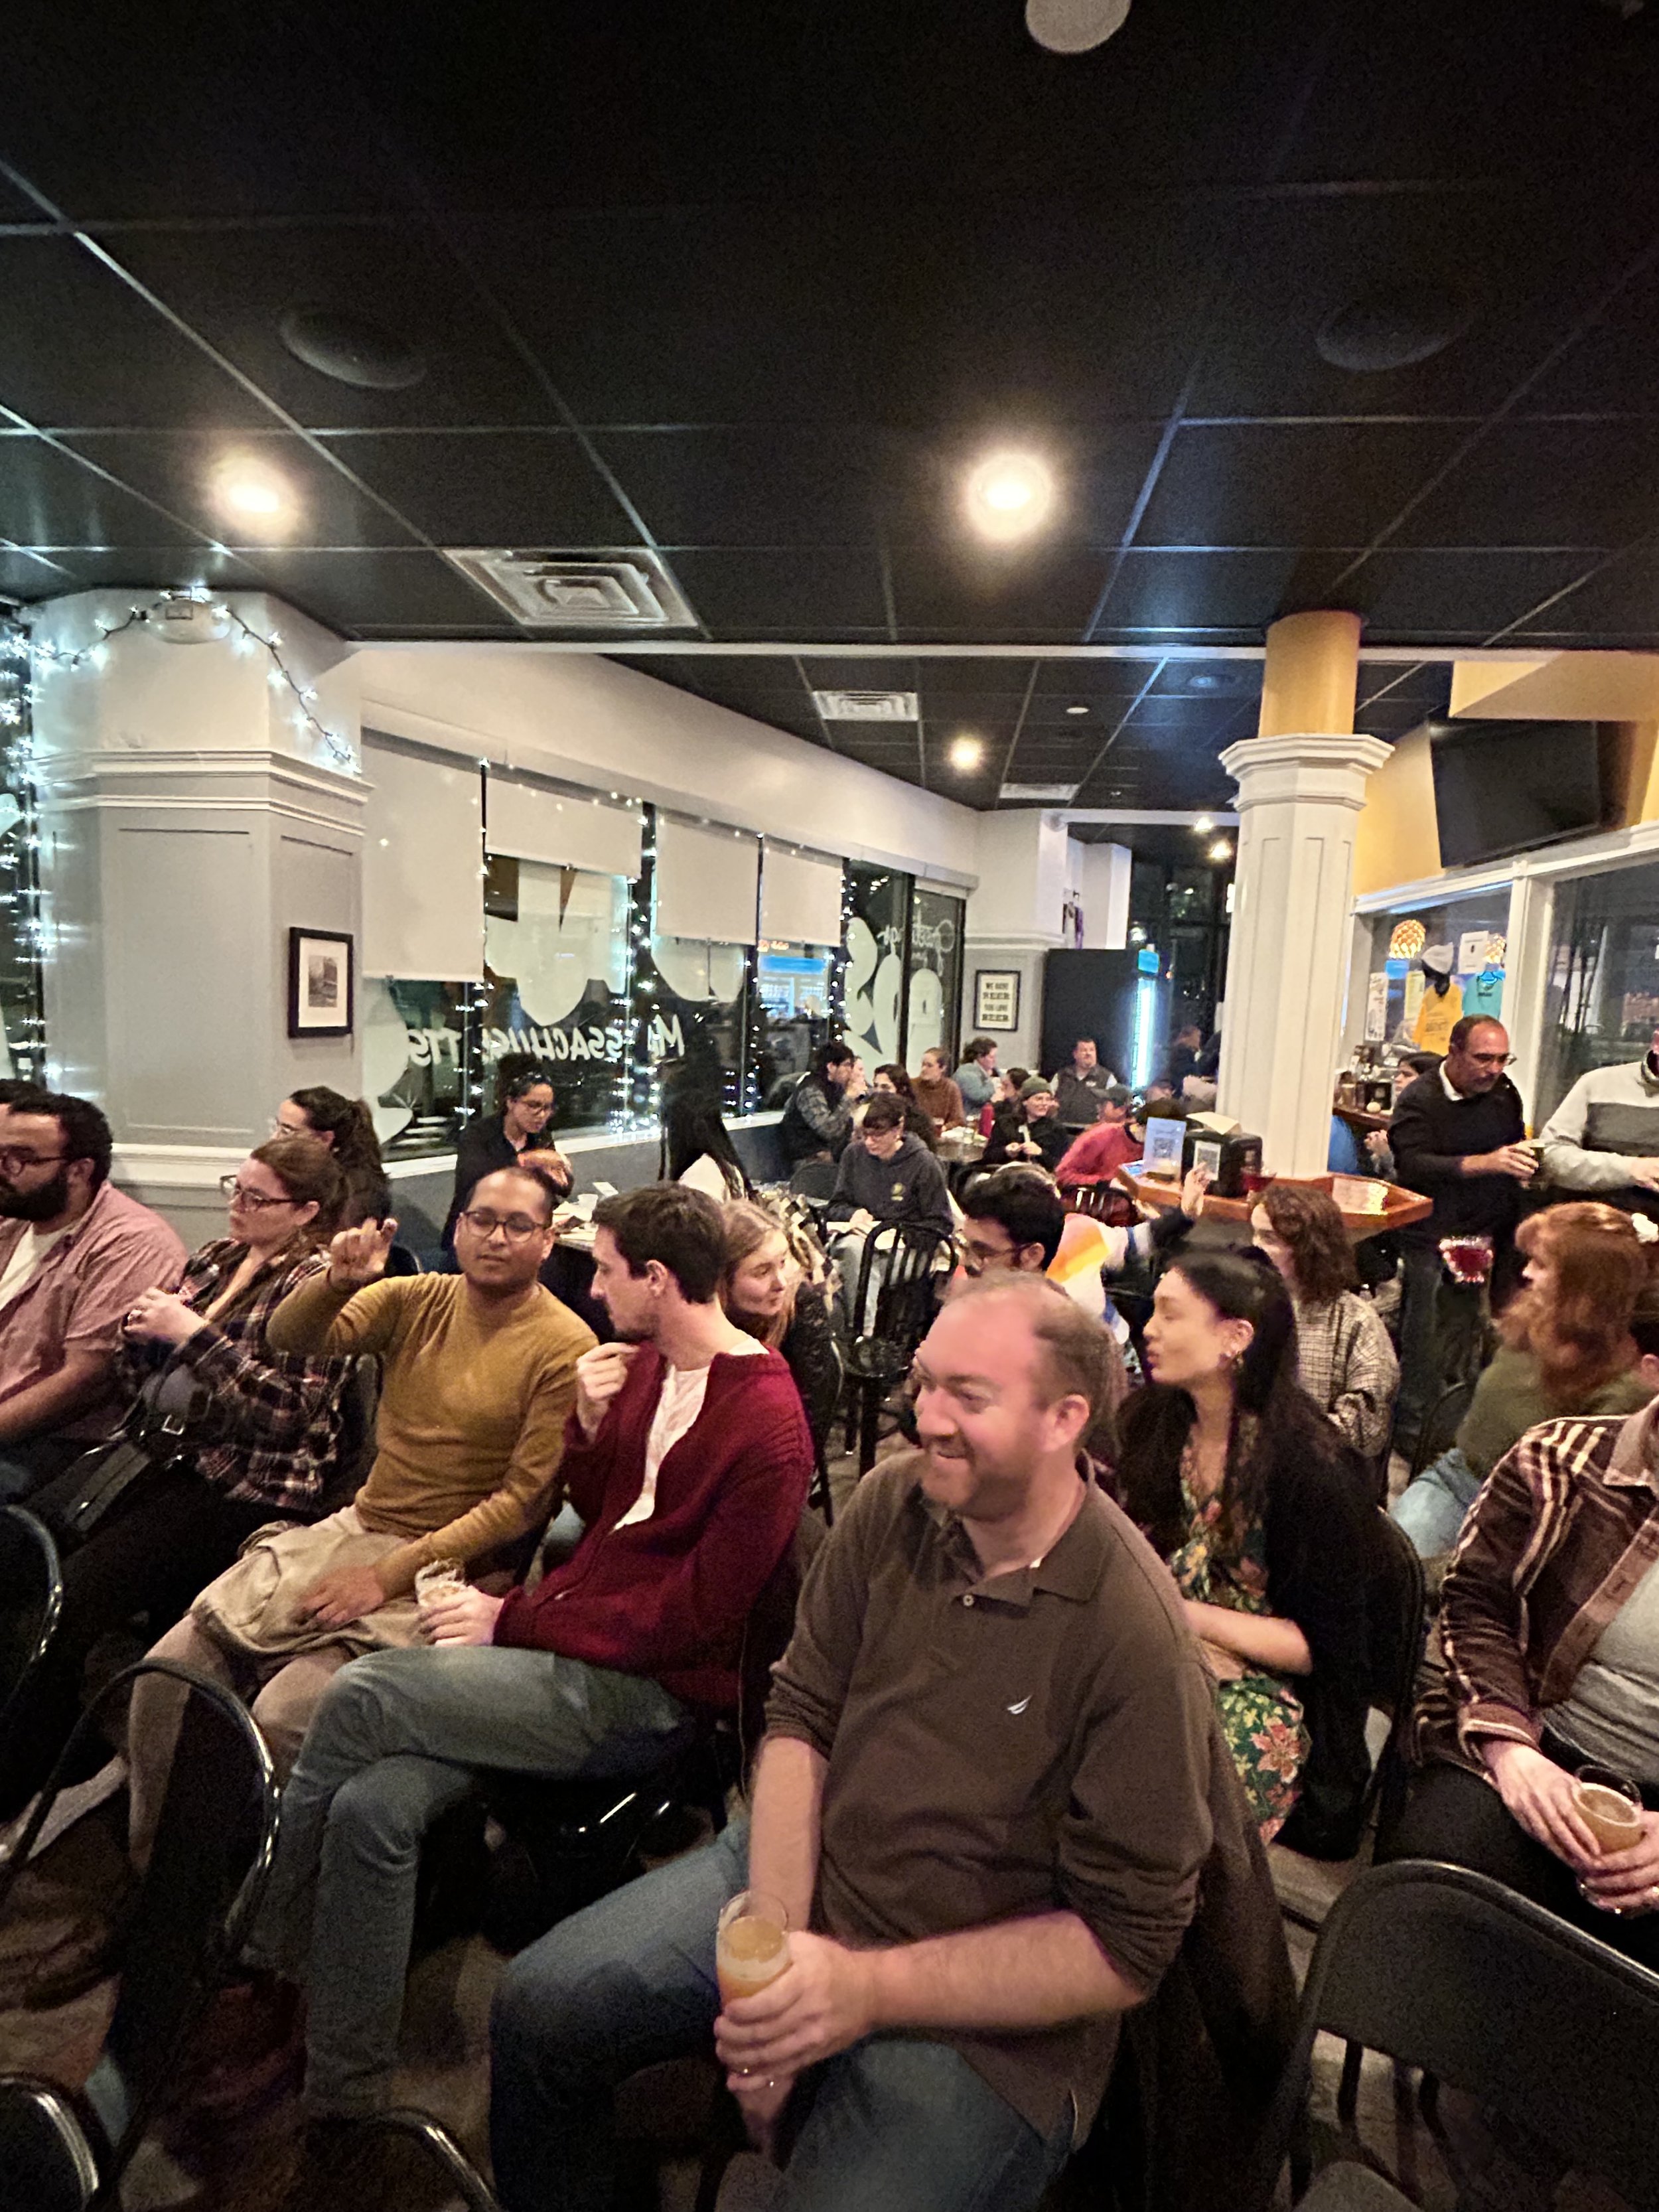 Full house for our monthly comedy night!